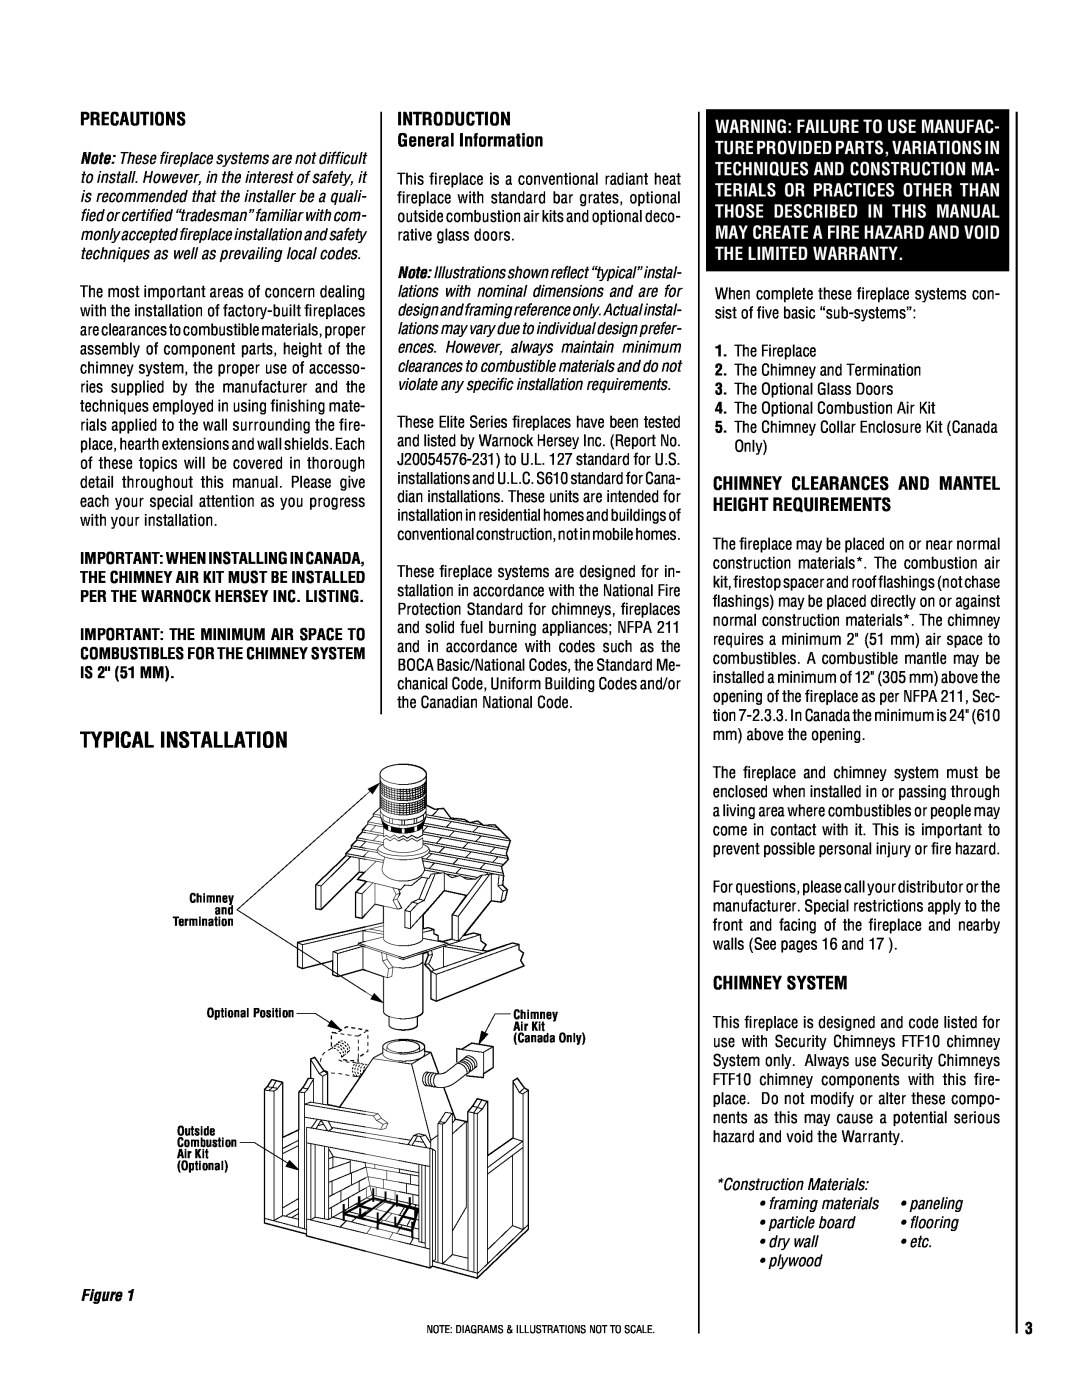 Lucent Technologies TM-4500 Typical Installation, Precautions, INTRODUCTION General Information, Chimney System 